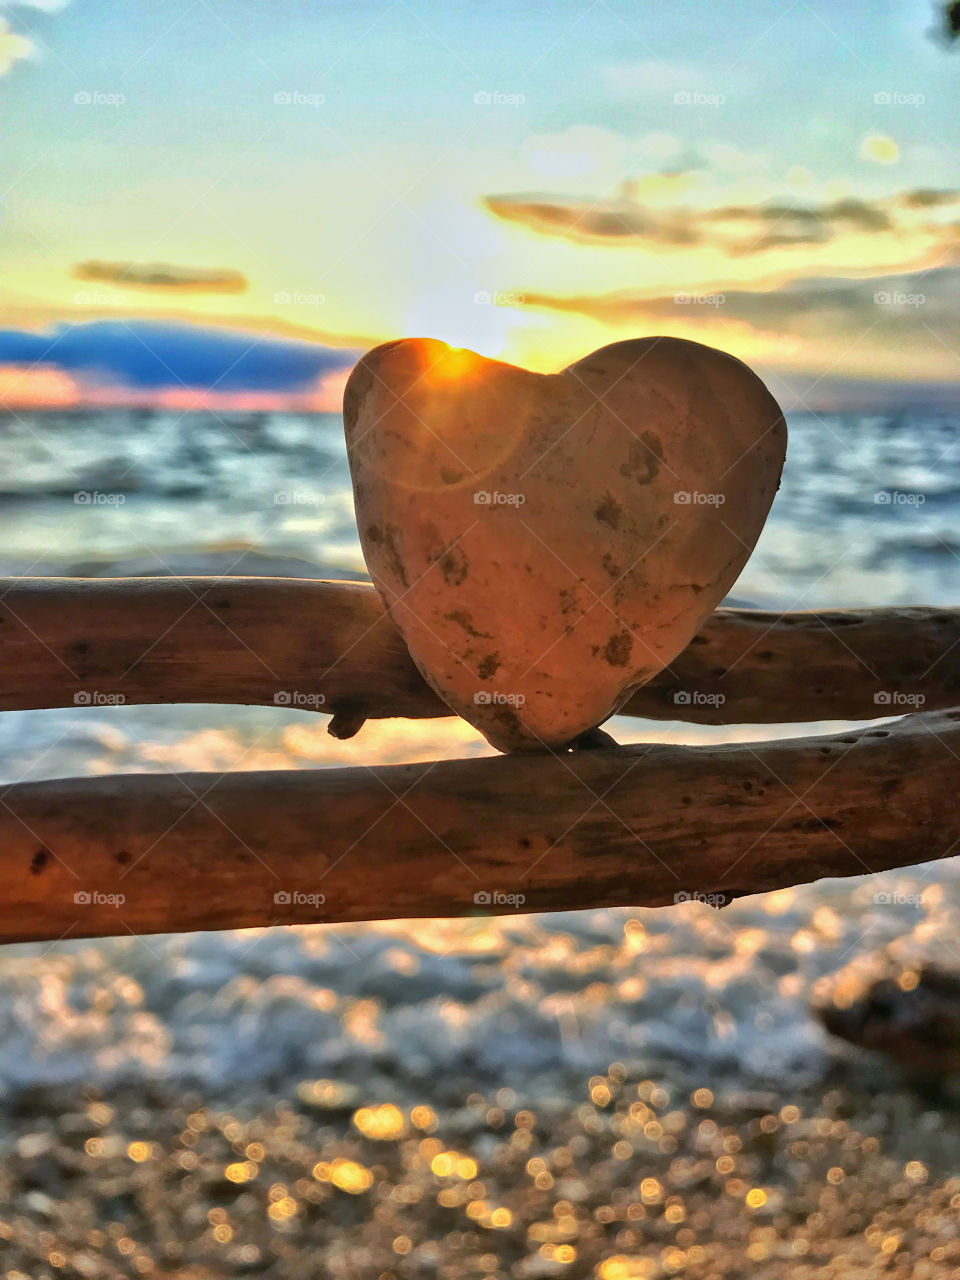 Found a heart shaped rock while watching the sun set on the beach in beautiful Door County, Wisconsin.